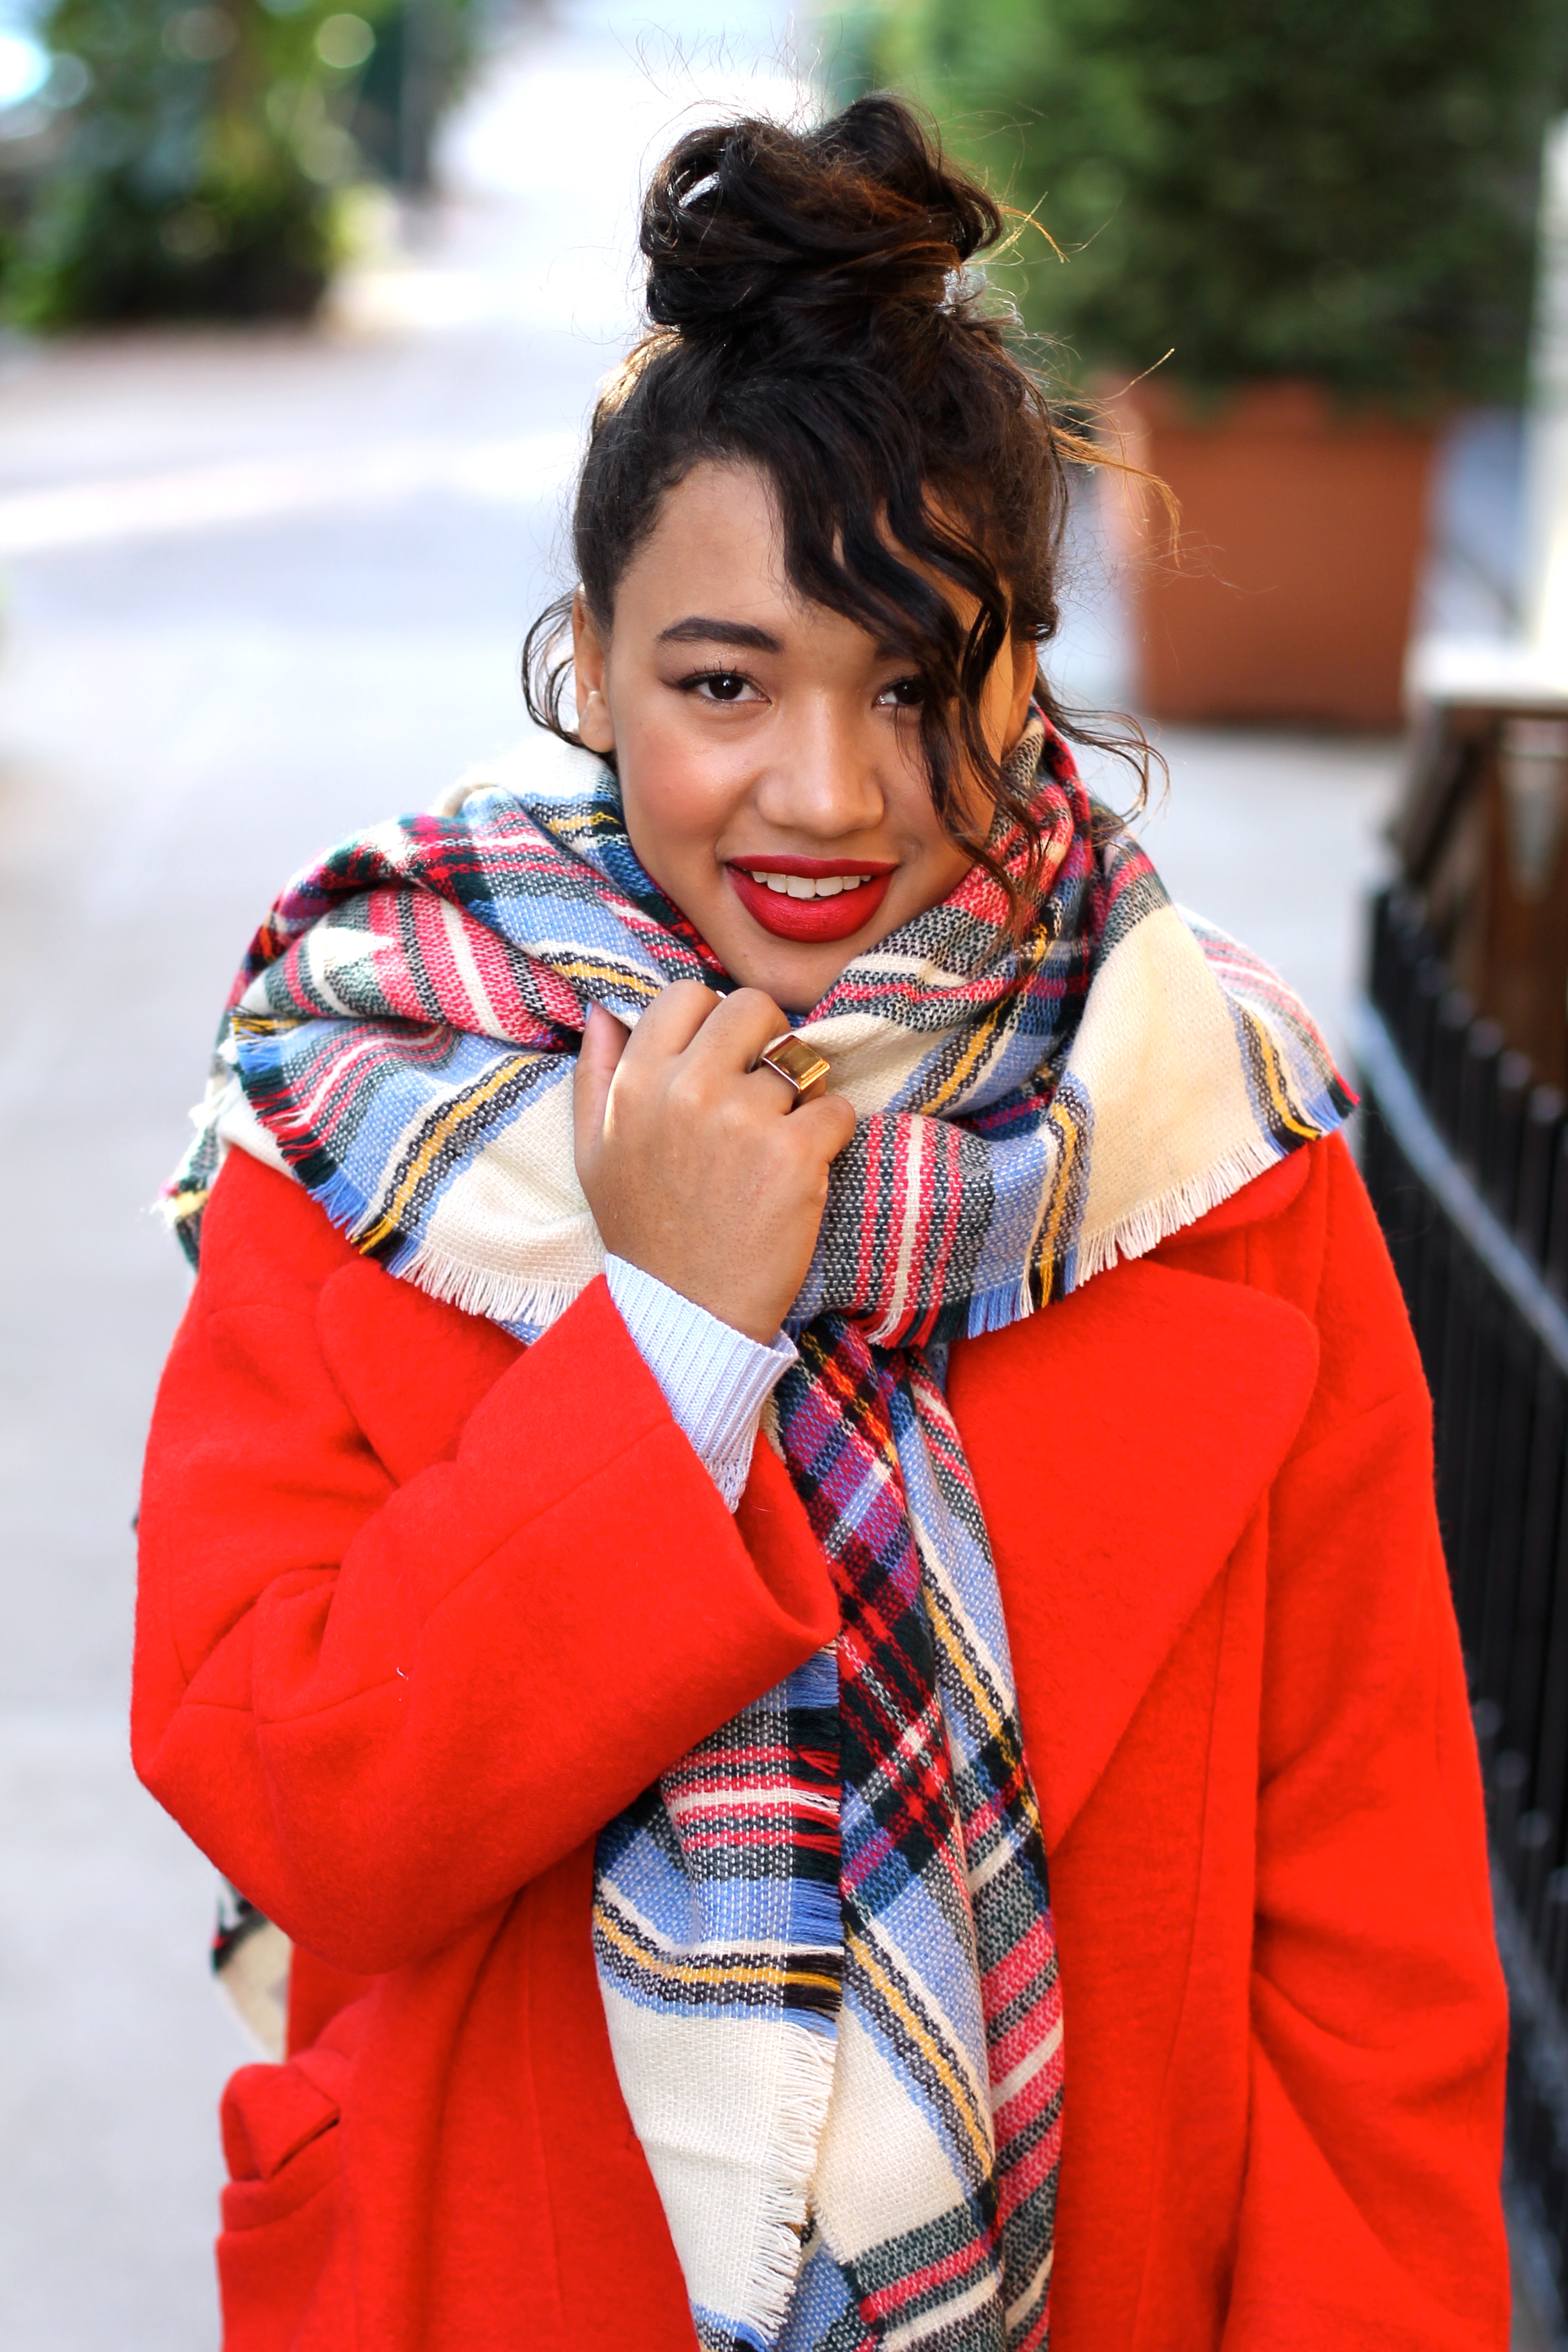 blanket scarf zara blanket scarf asos blanket scarf blanket scarf oversized coat oversized scarf red coat fall red coat perfect red coat fashion blogger new york fashion blogger nyc fashion blogger street style fall style 